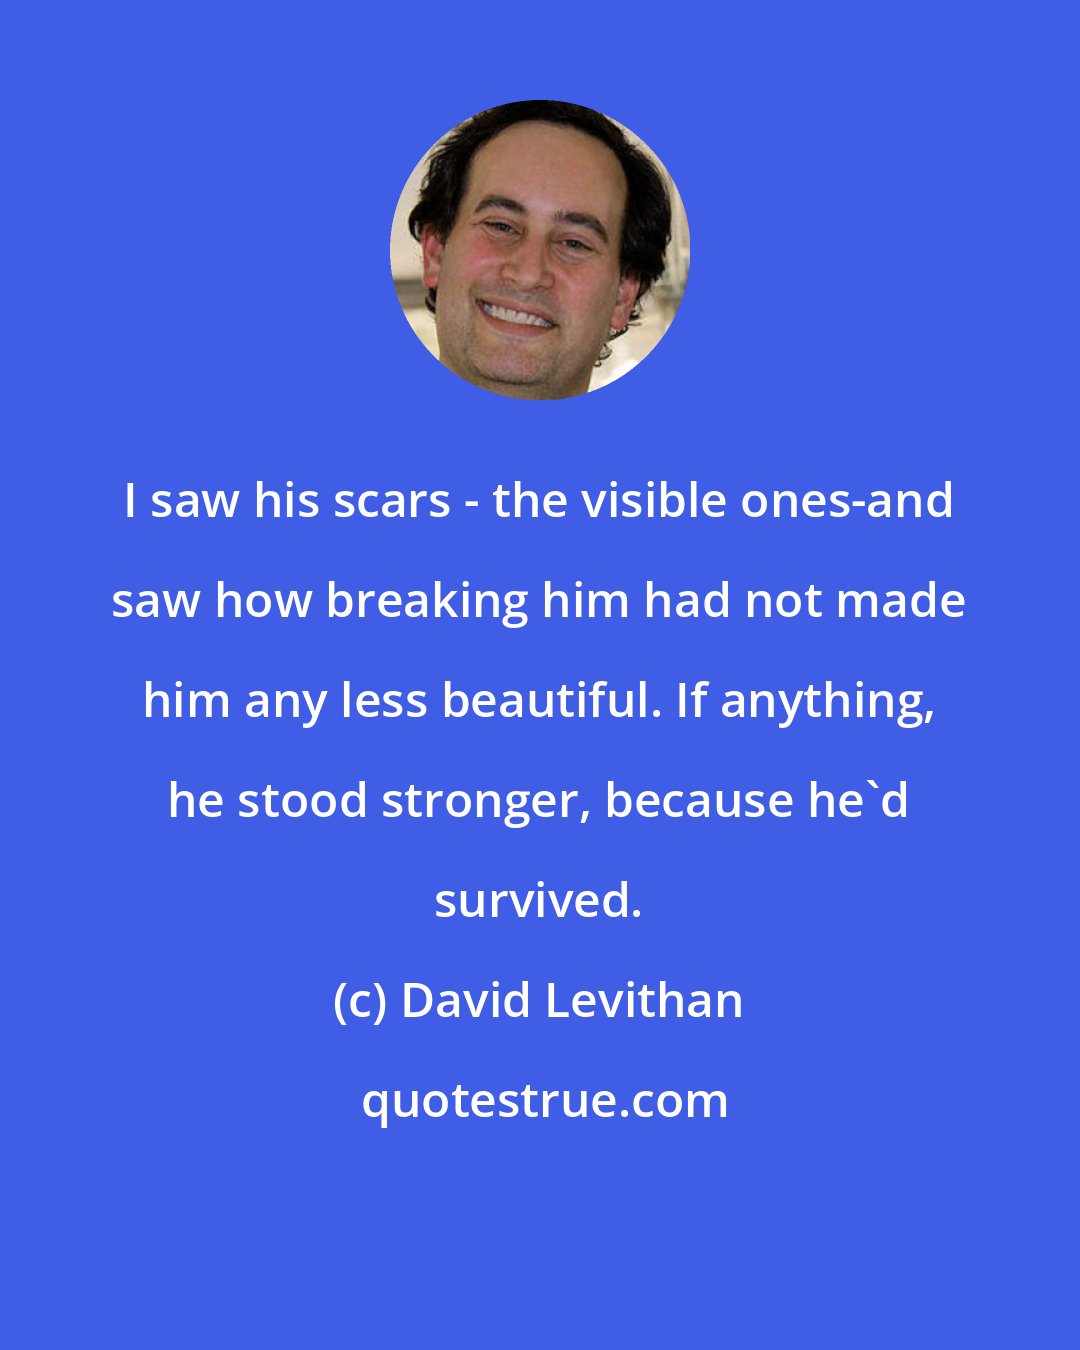 David Levithan: I saw his scars - the visible ones-and saw how breaking him had not made him any less beautiful. If anything, he stood stronger, because he'd survived.